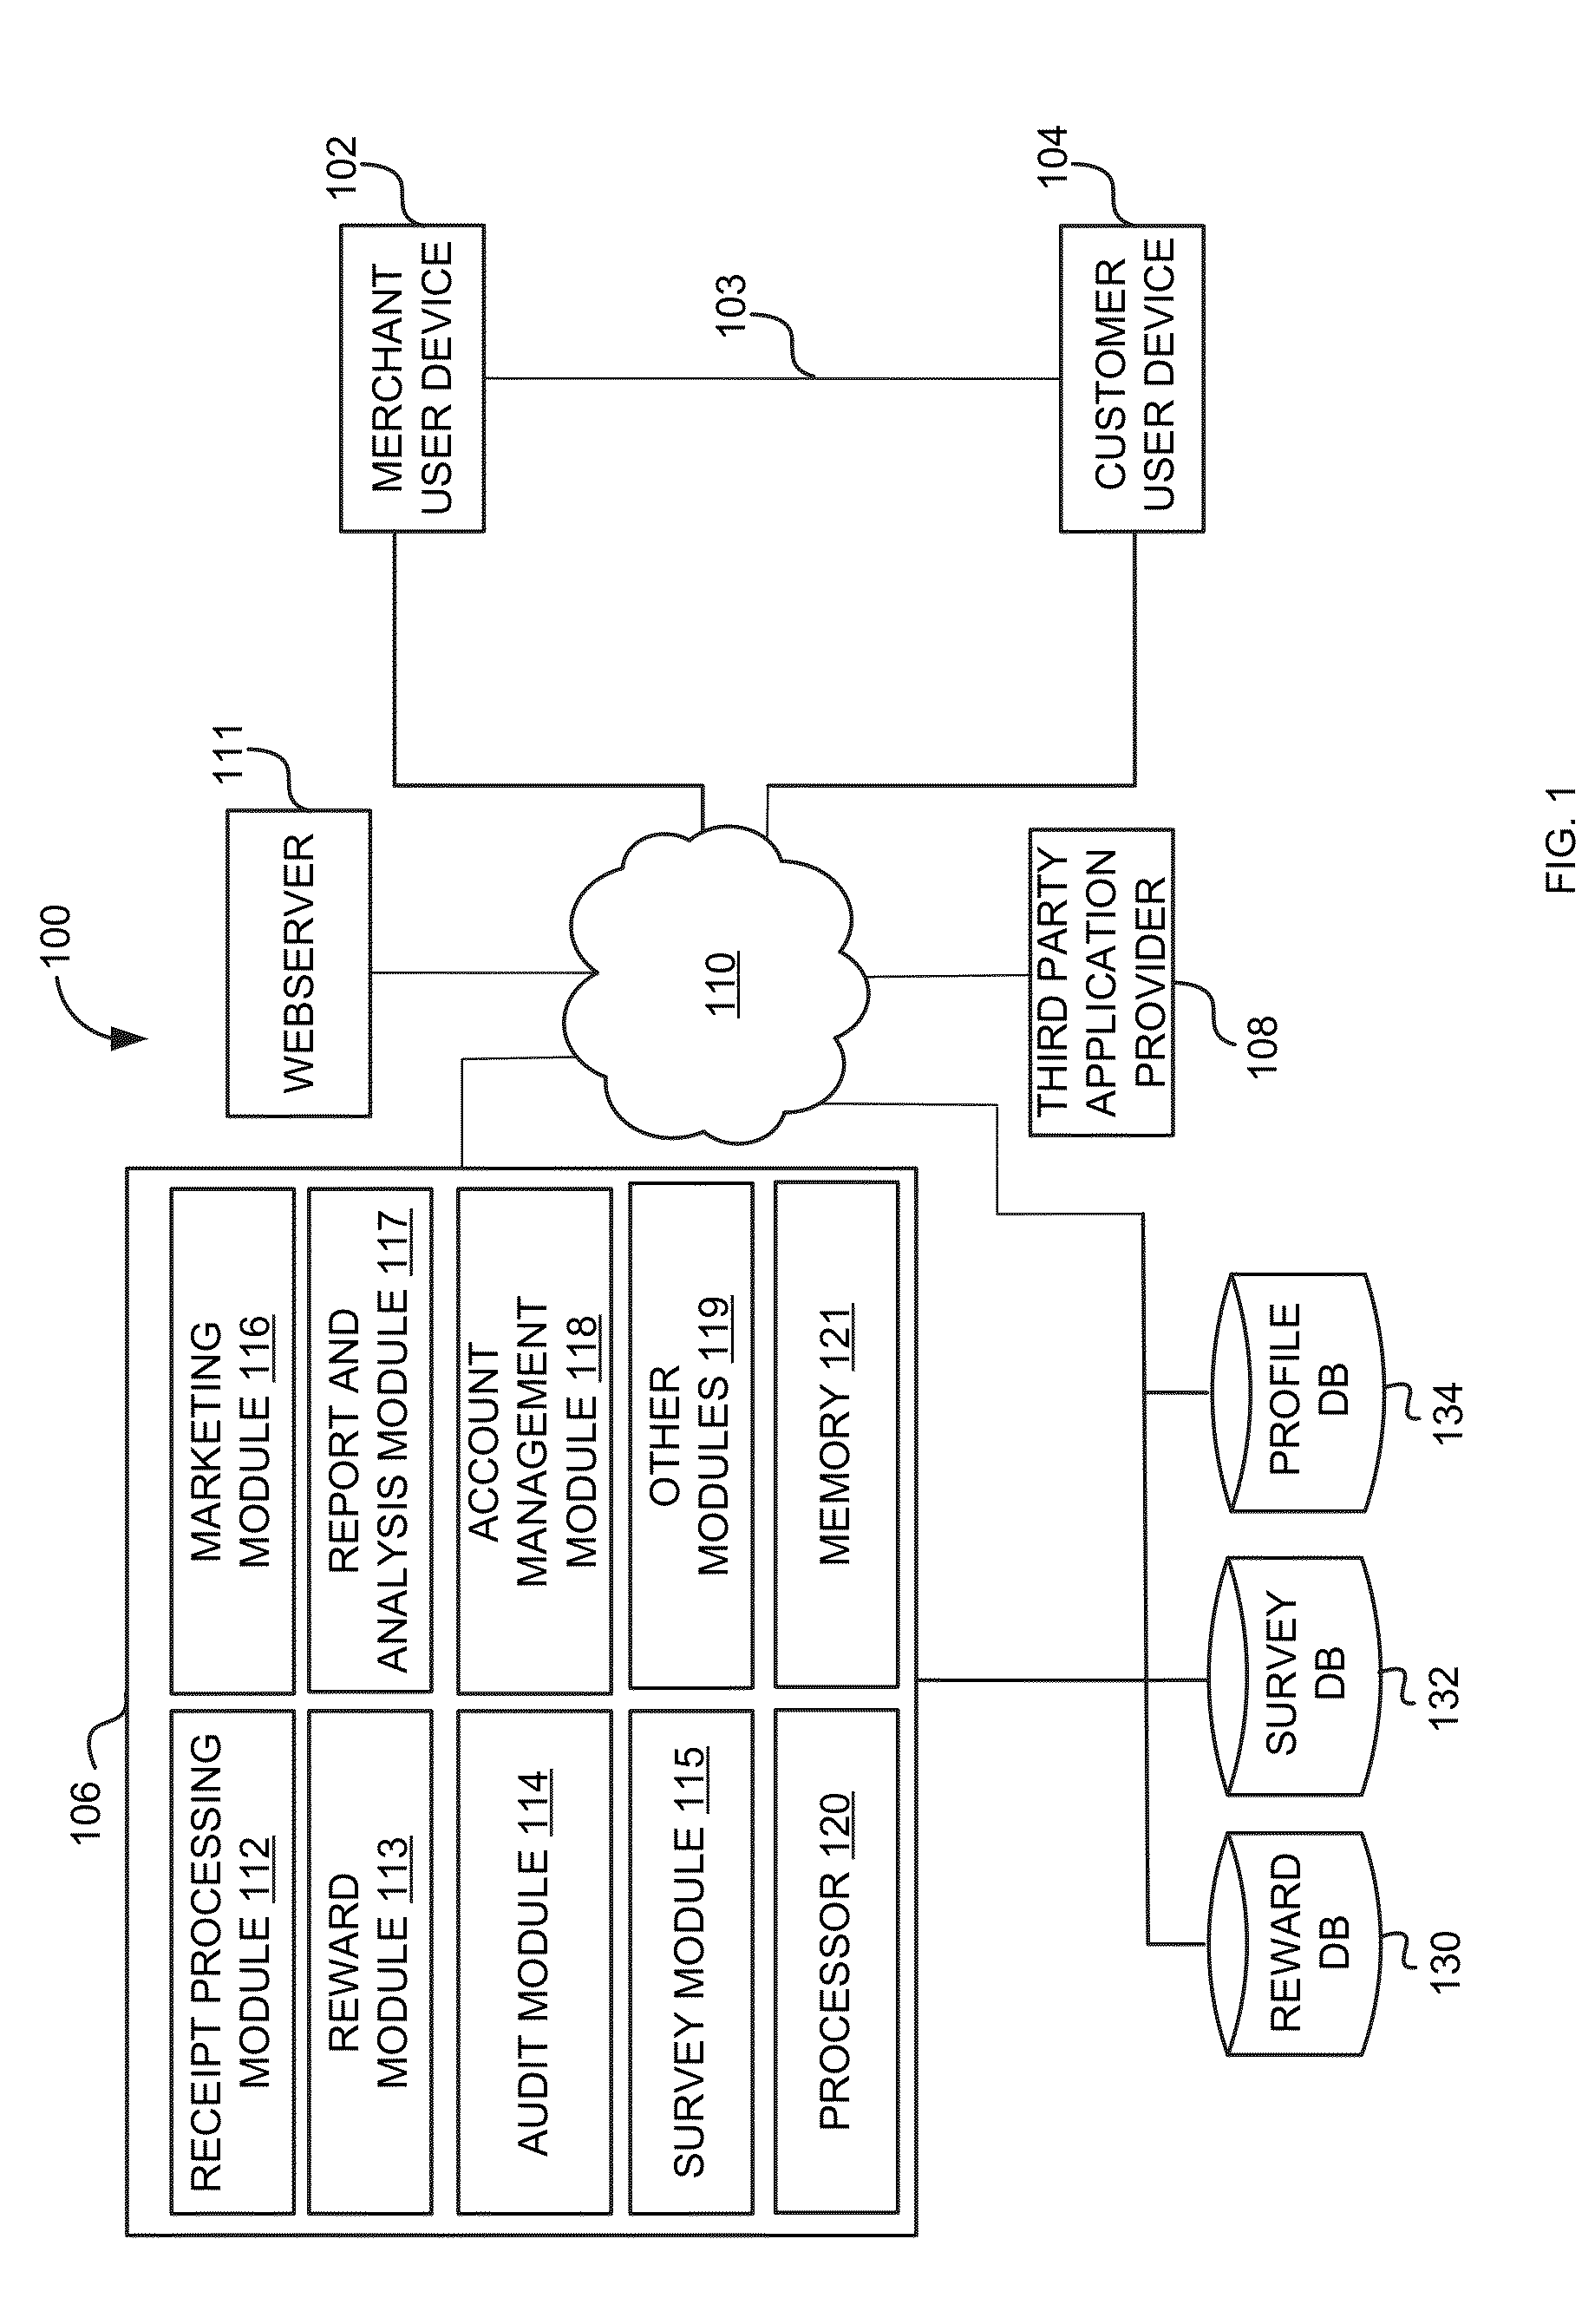 System and method for providing imaging and other digital representations of receipts to impart incentives on users